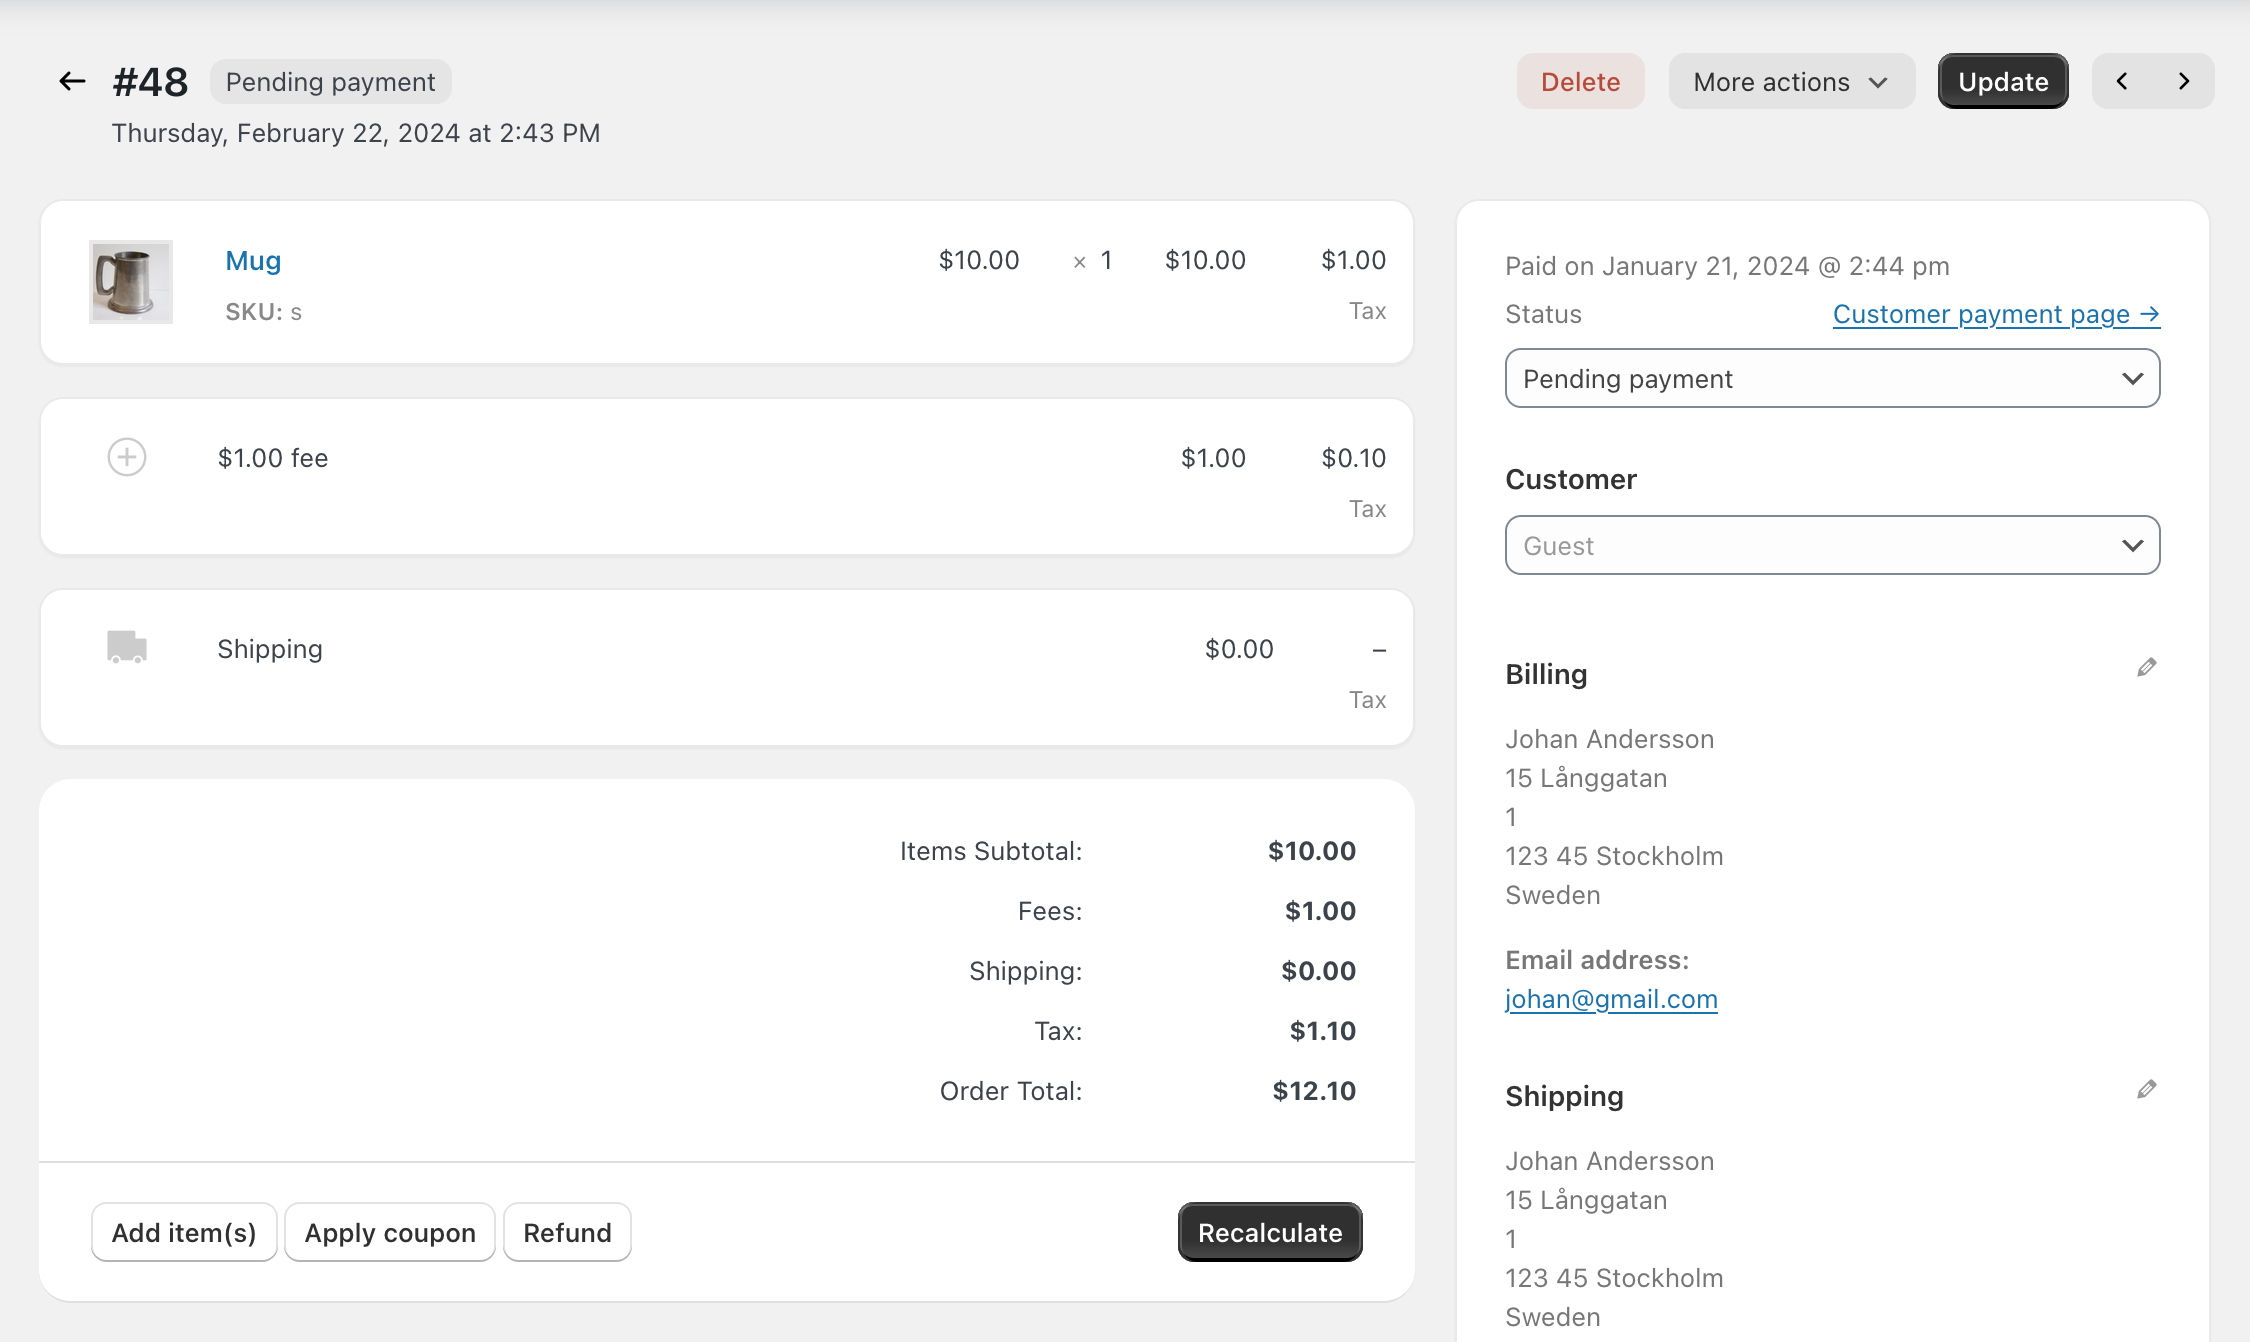 Screenshot of the WooCommerce order edit page, showing how the action buttons and line items look after recent changes.